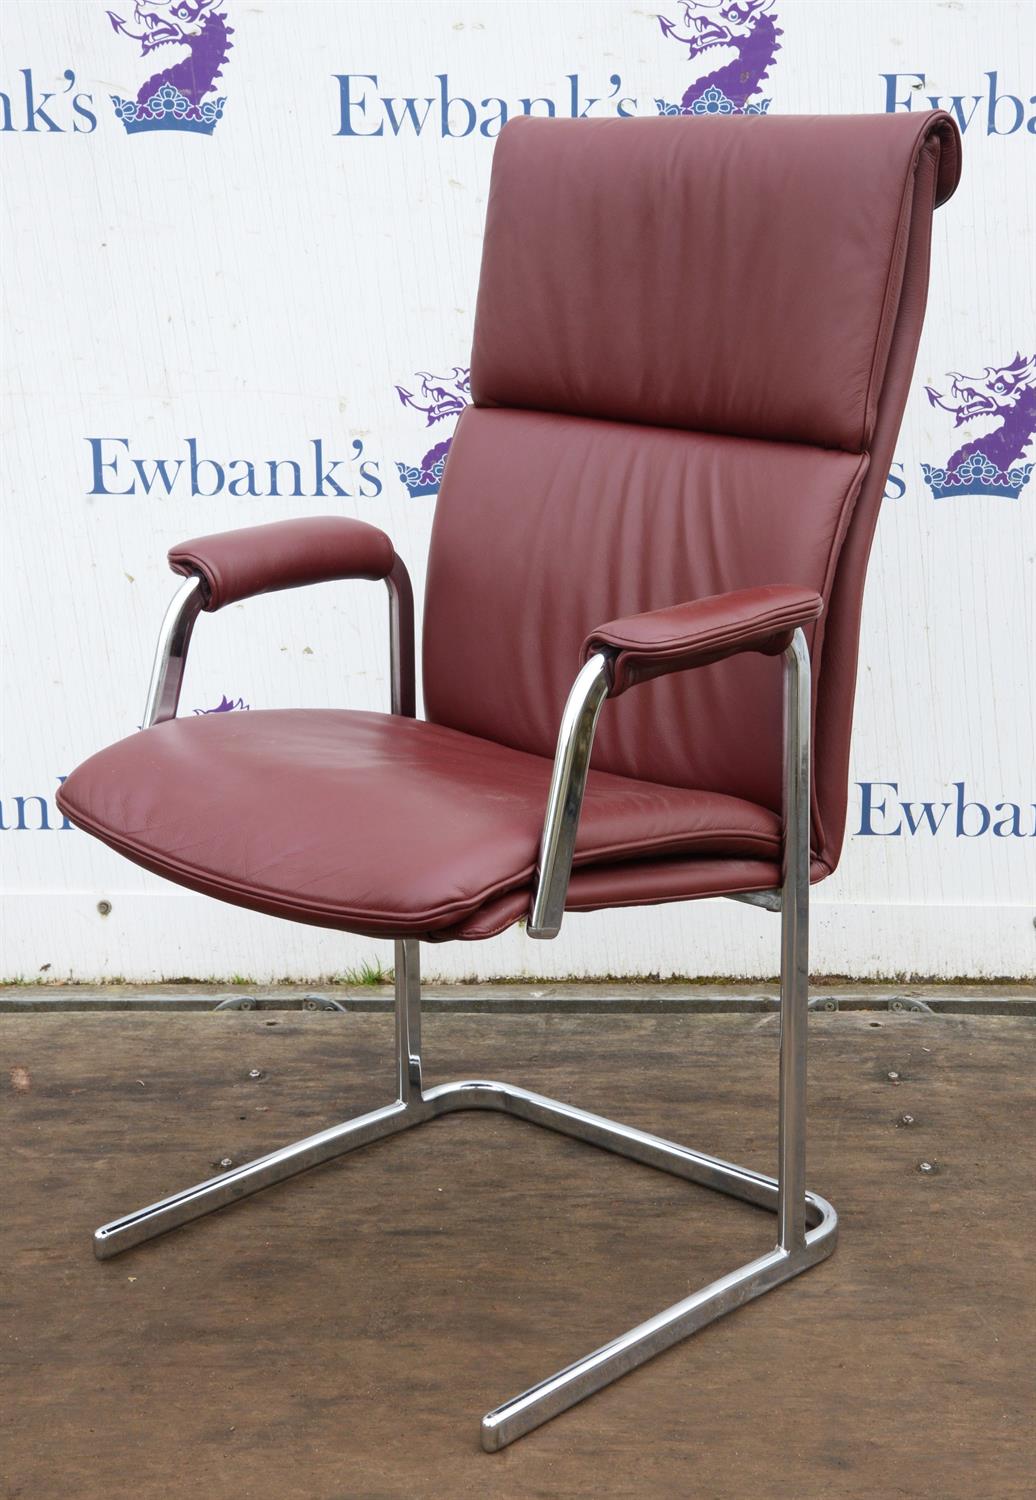 Boss, five executive armchairs, burgundy leather and chromed steel, 104cm high x 61cm wide x 69cm - Image 5 of 6